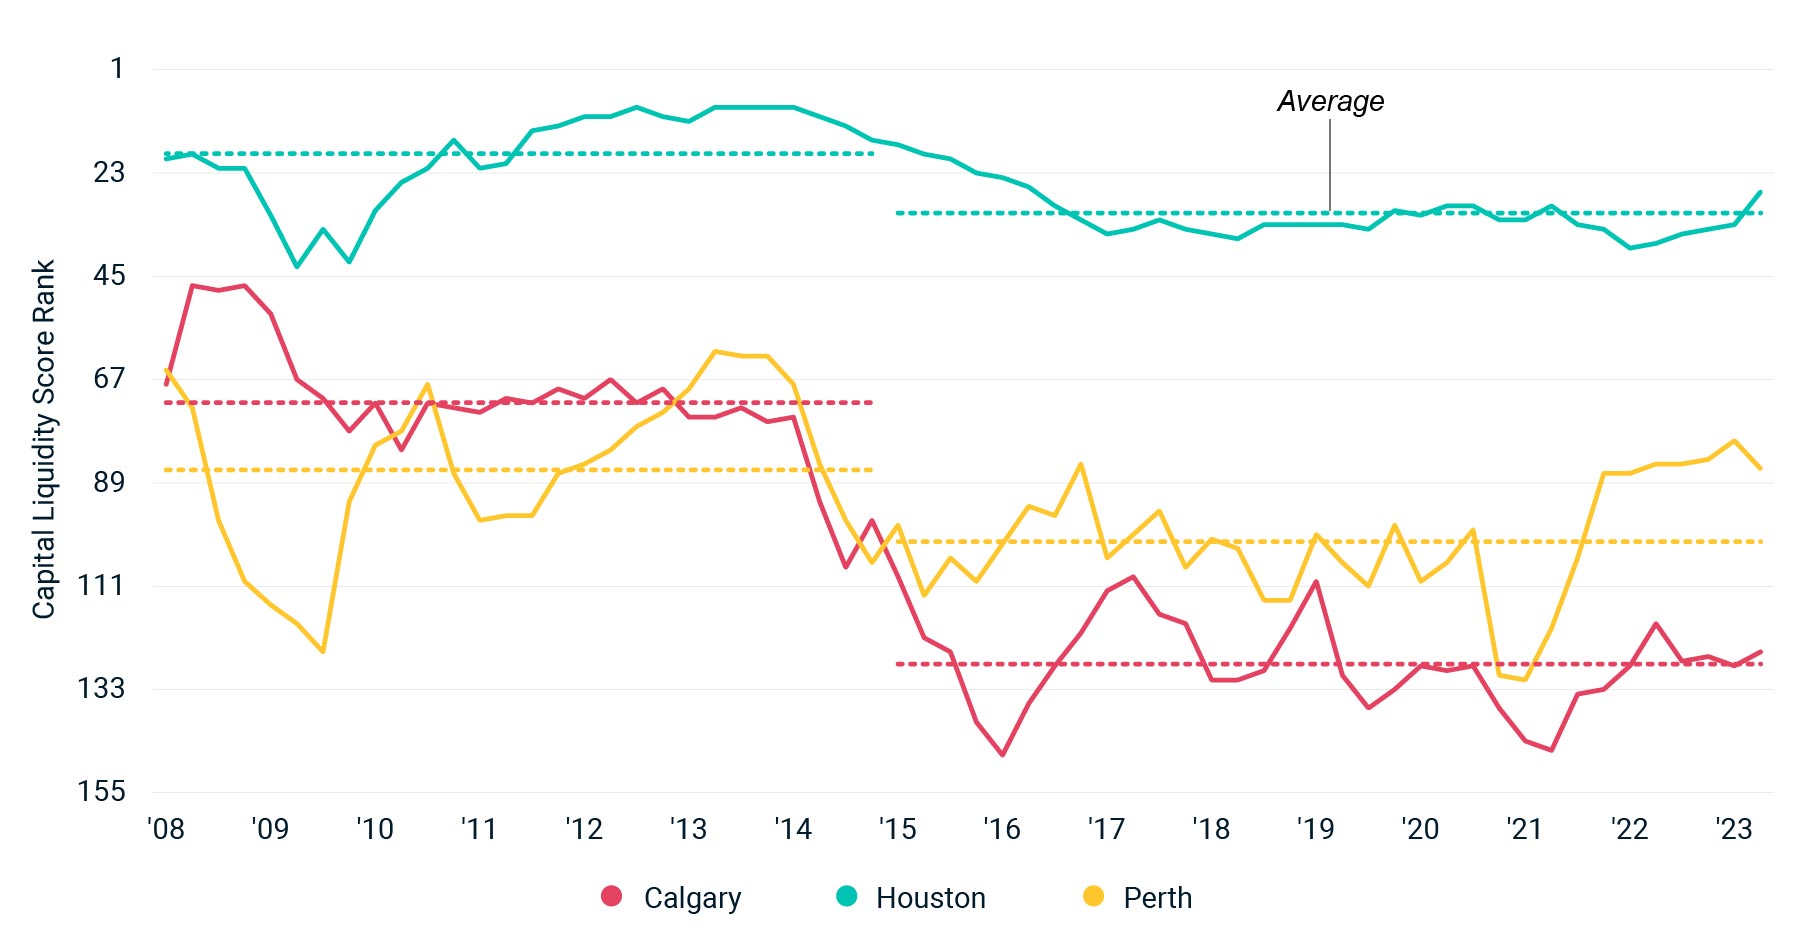 This line graph shows the Capital Liquidity Scores ranks of Calgary, Houston and Perth since 2008. It also plots the average rank for two periods: 2008-14 and 2015 to Q2 2023.